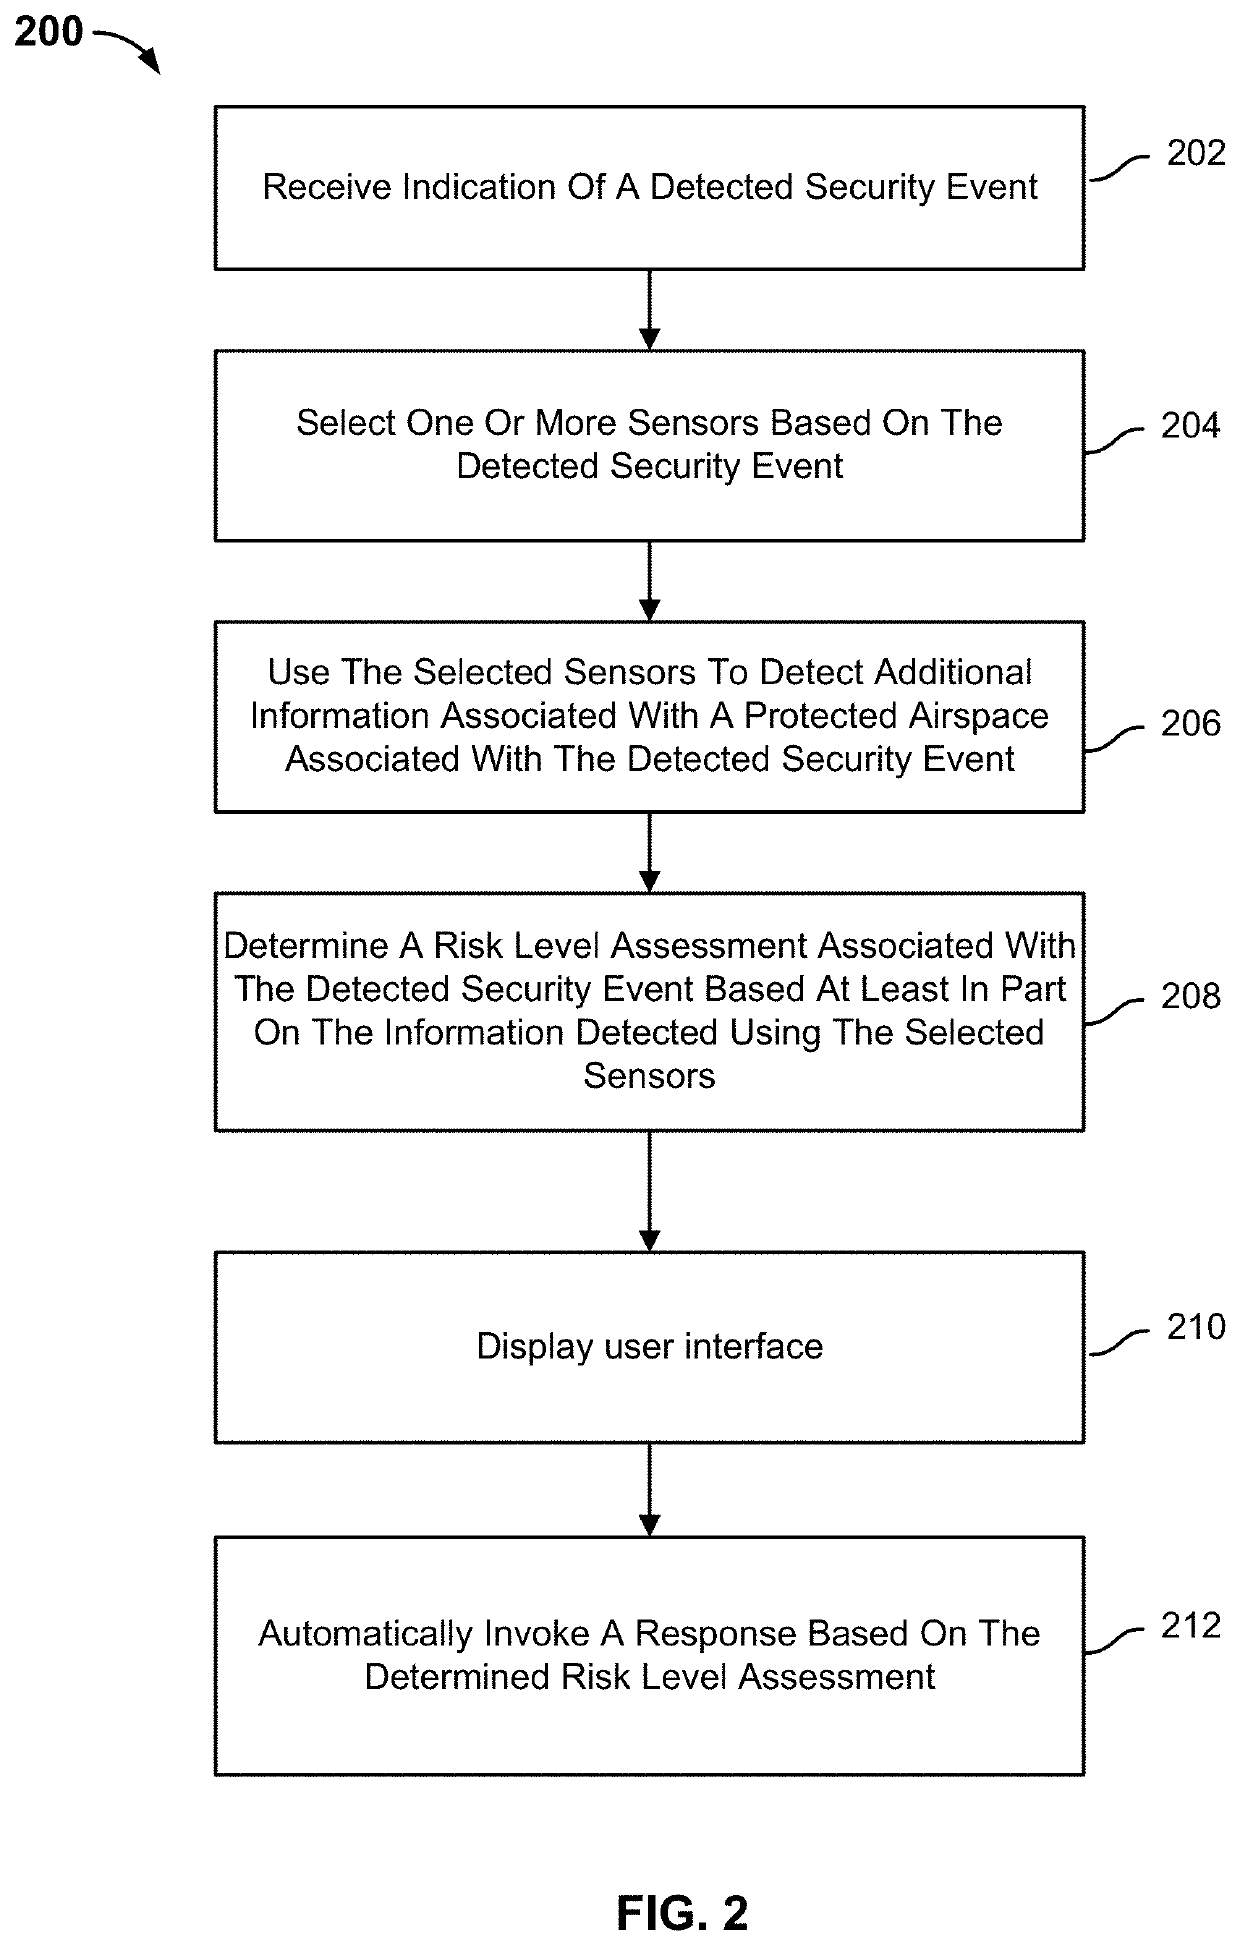 Security event detection and threat assessment